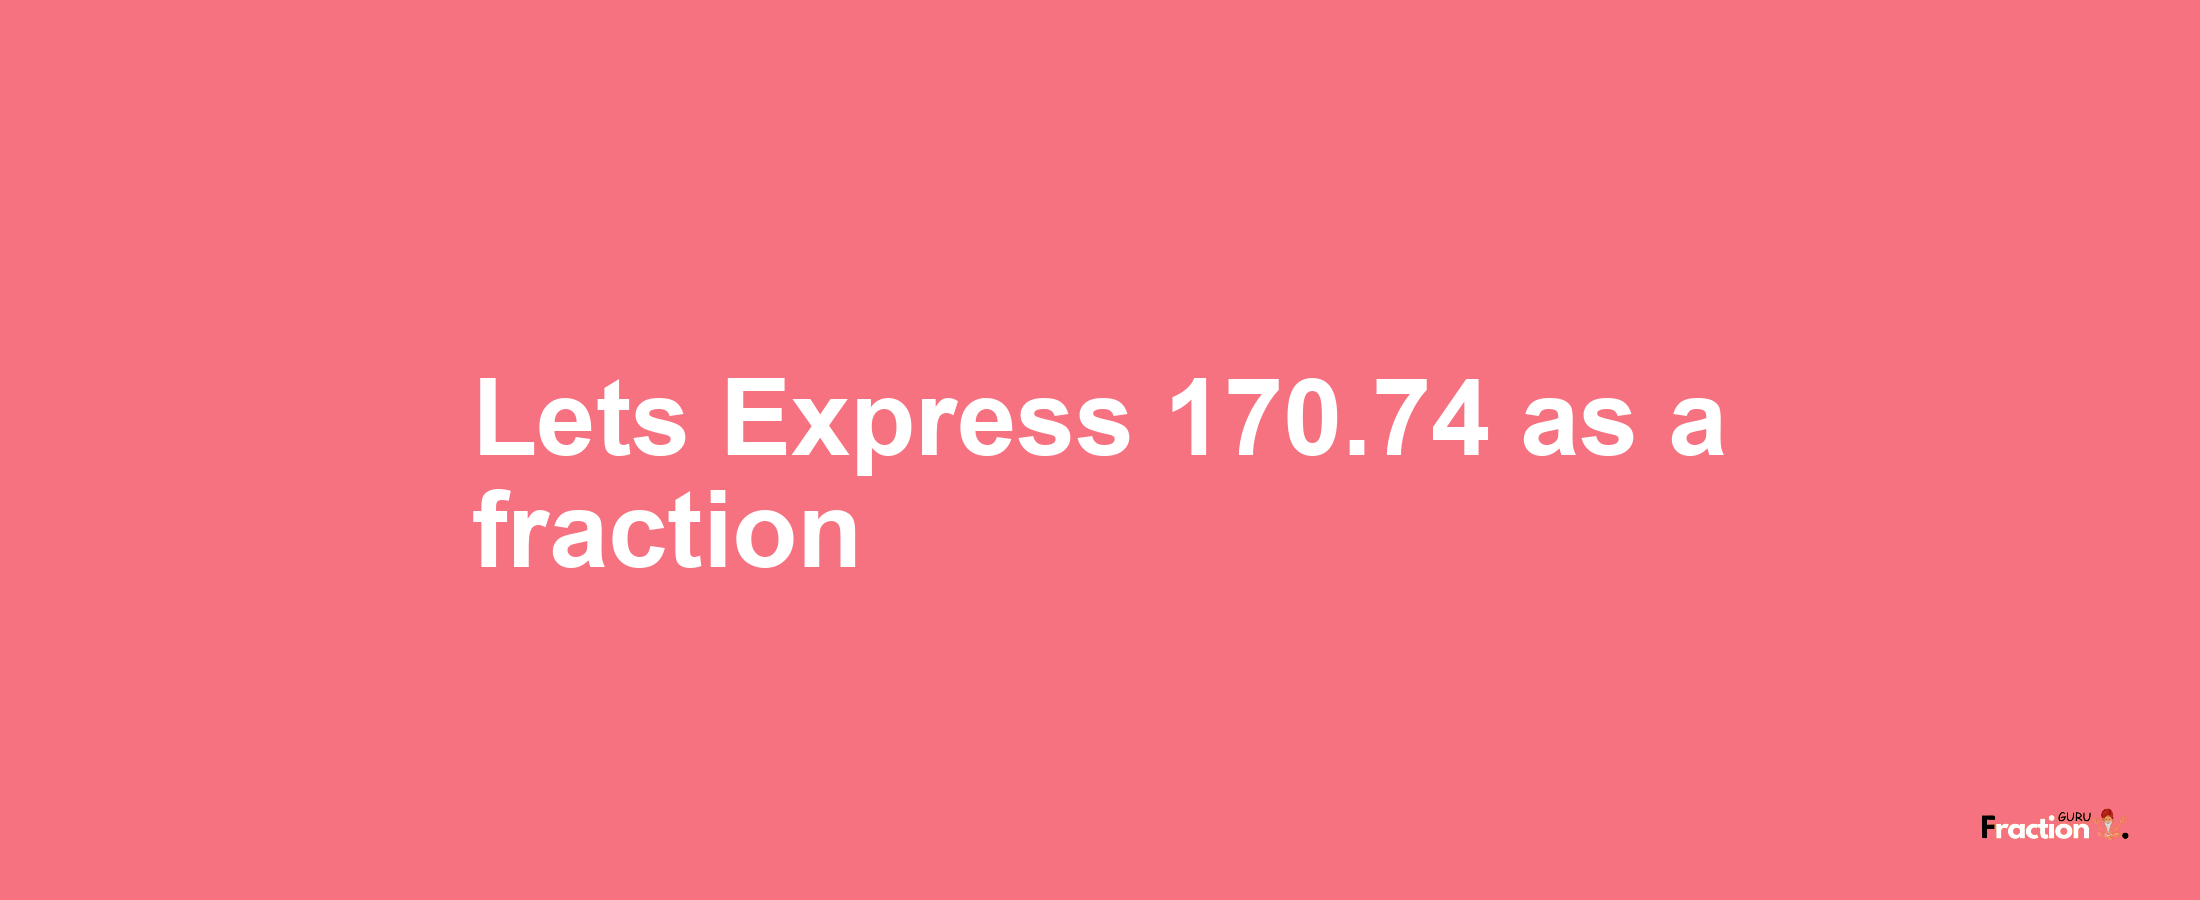 Lets Express 170.74 as afraction